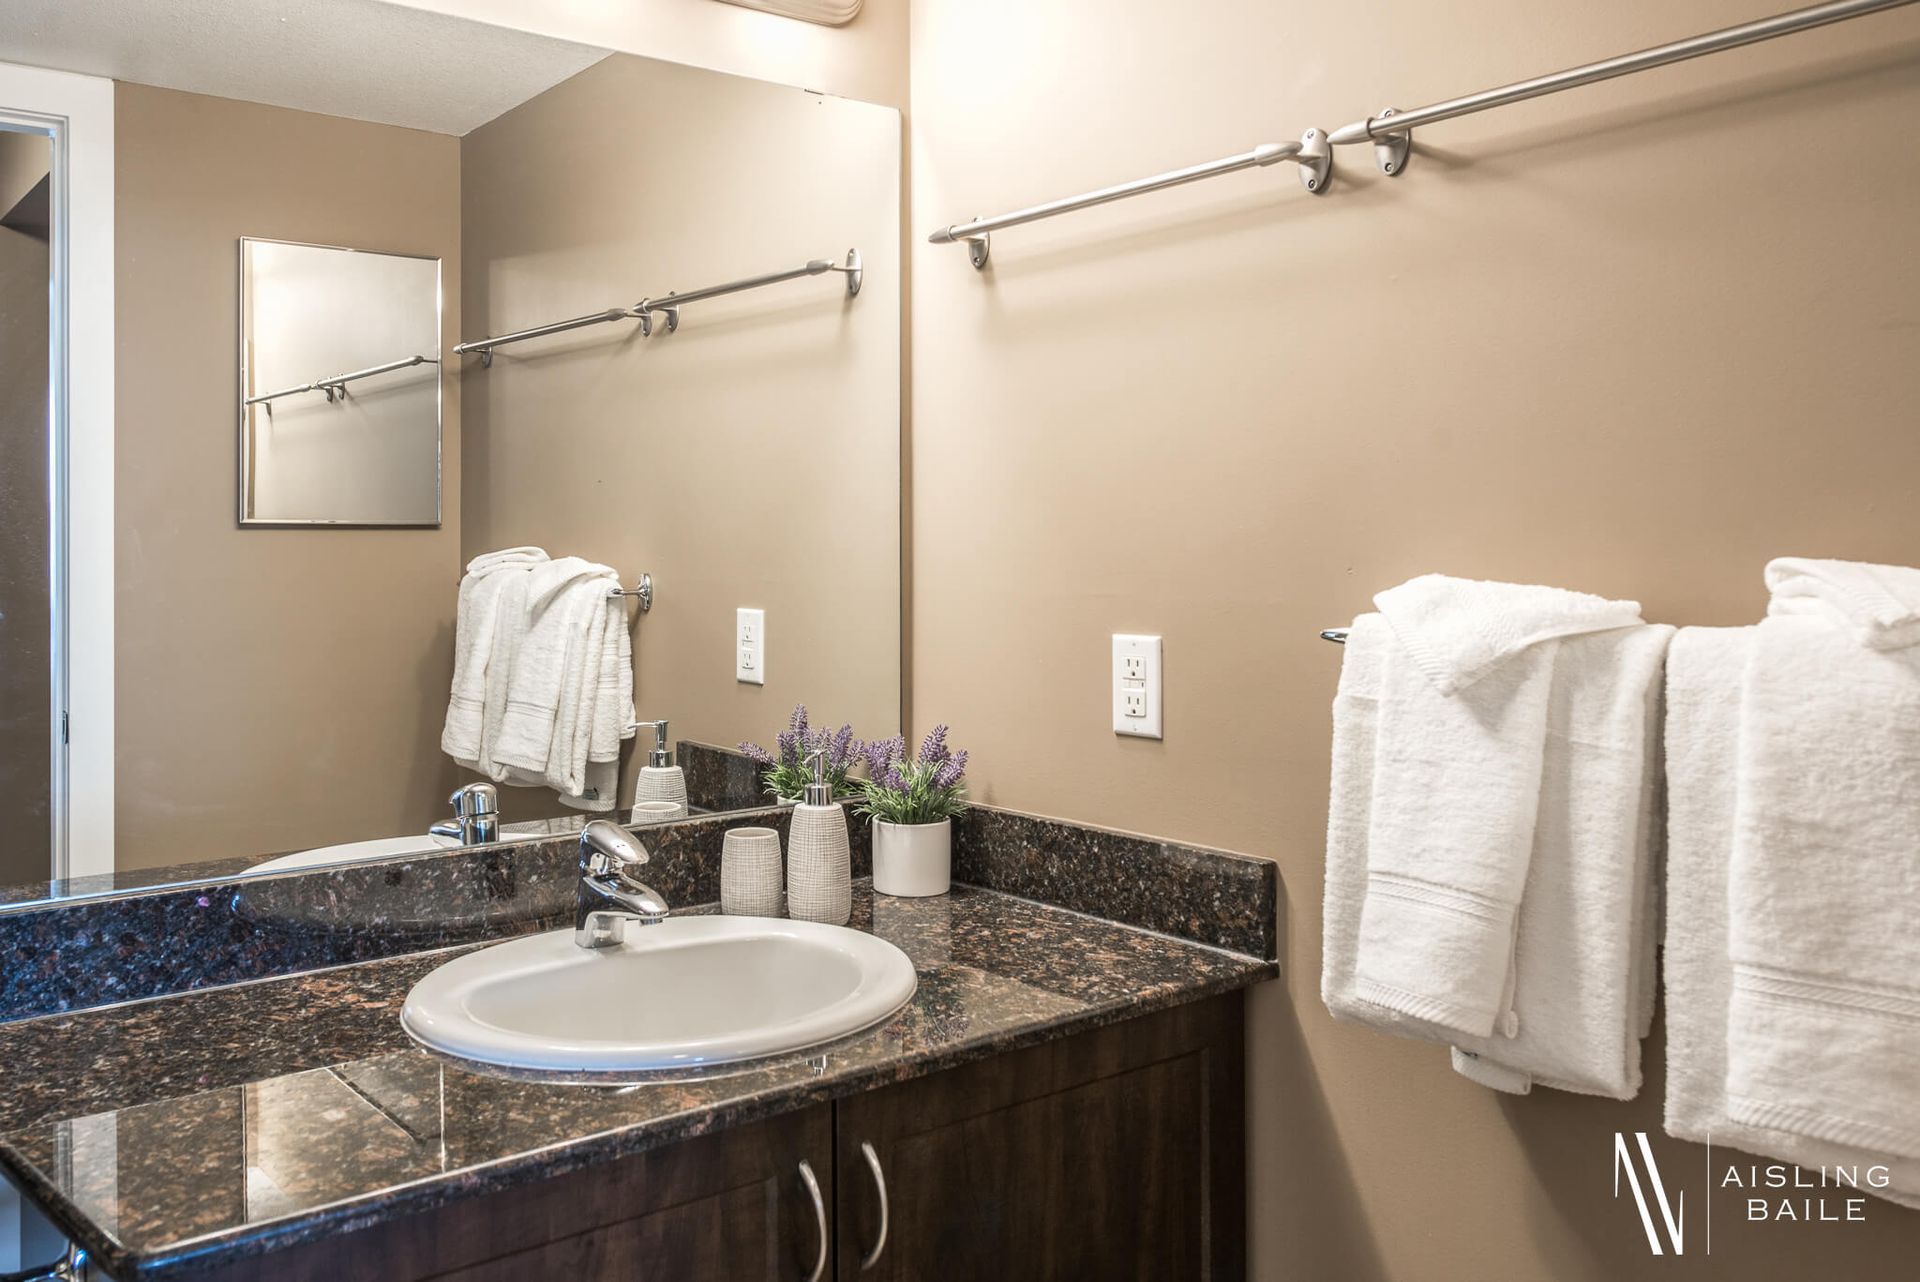 Private ensuite at the Stylish condo of Lake Windermere Pointe in Invermere, a BC Vacation Rental hosted by Aisling Baile Property Management.